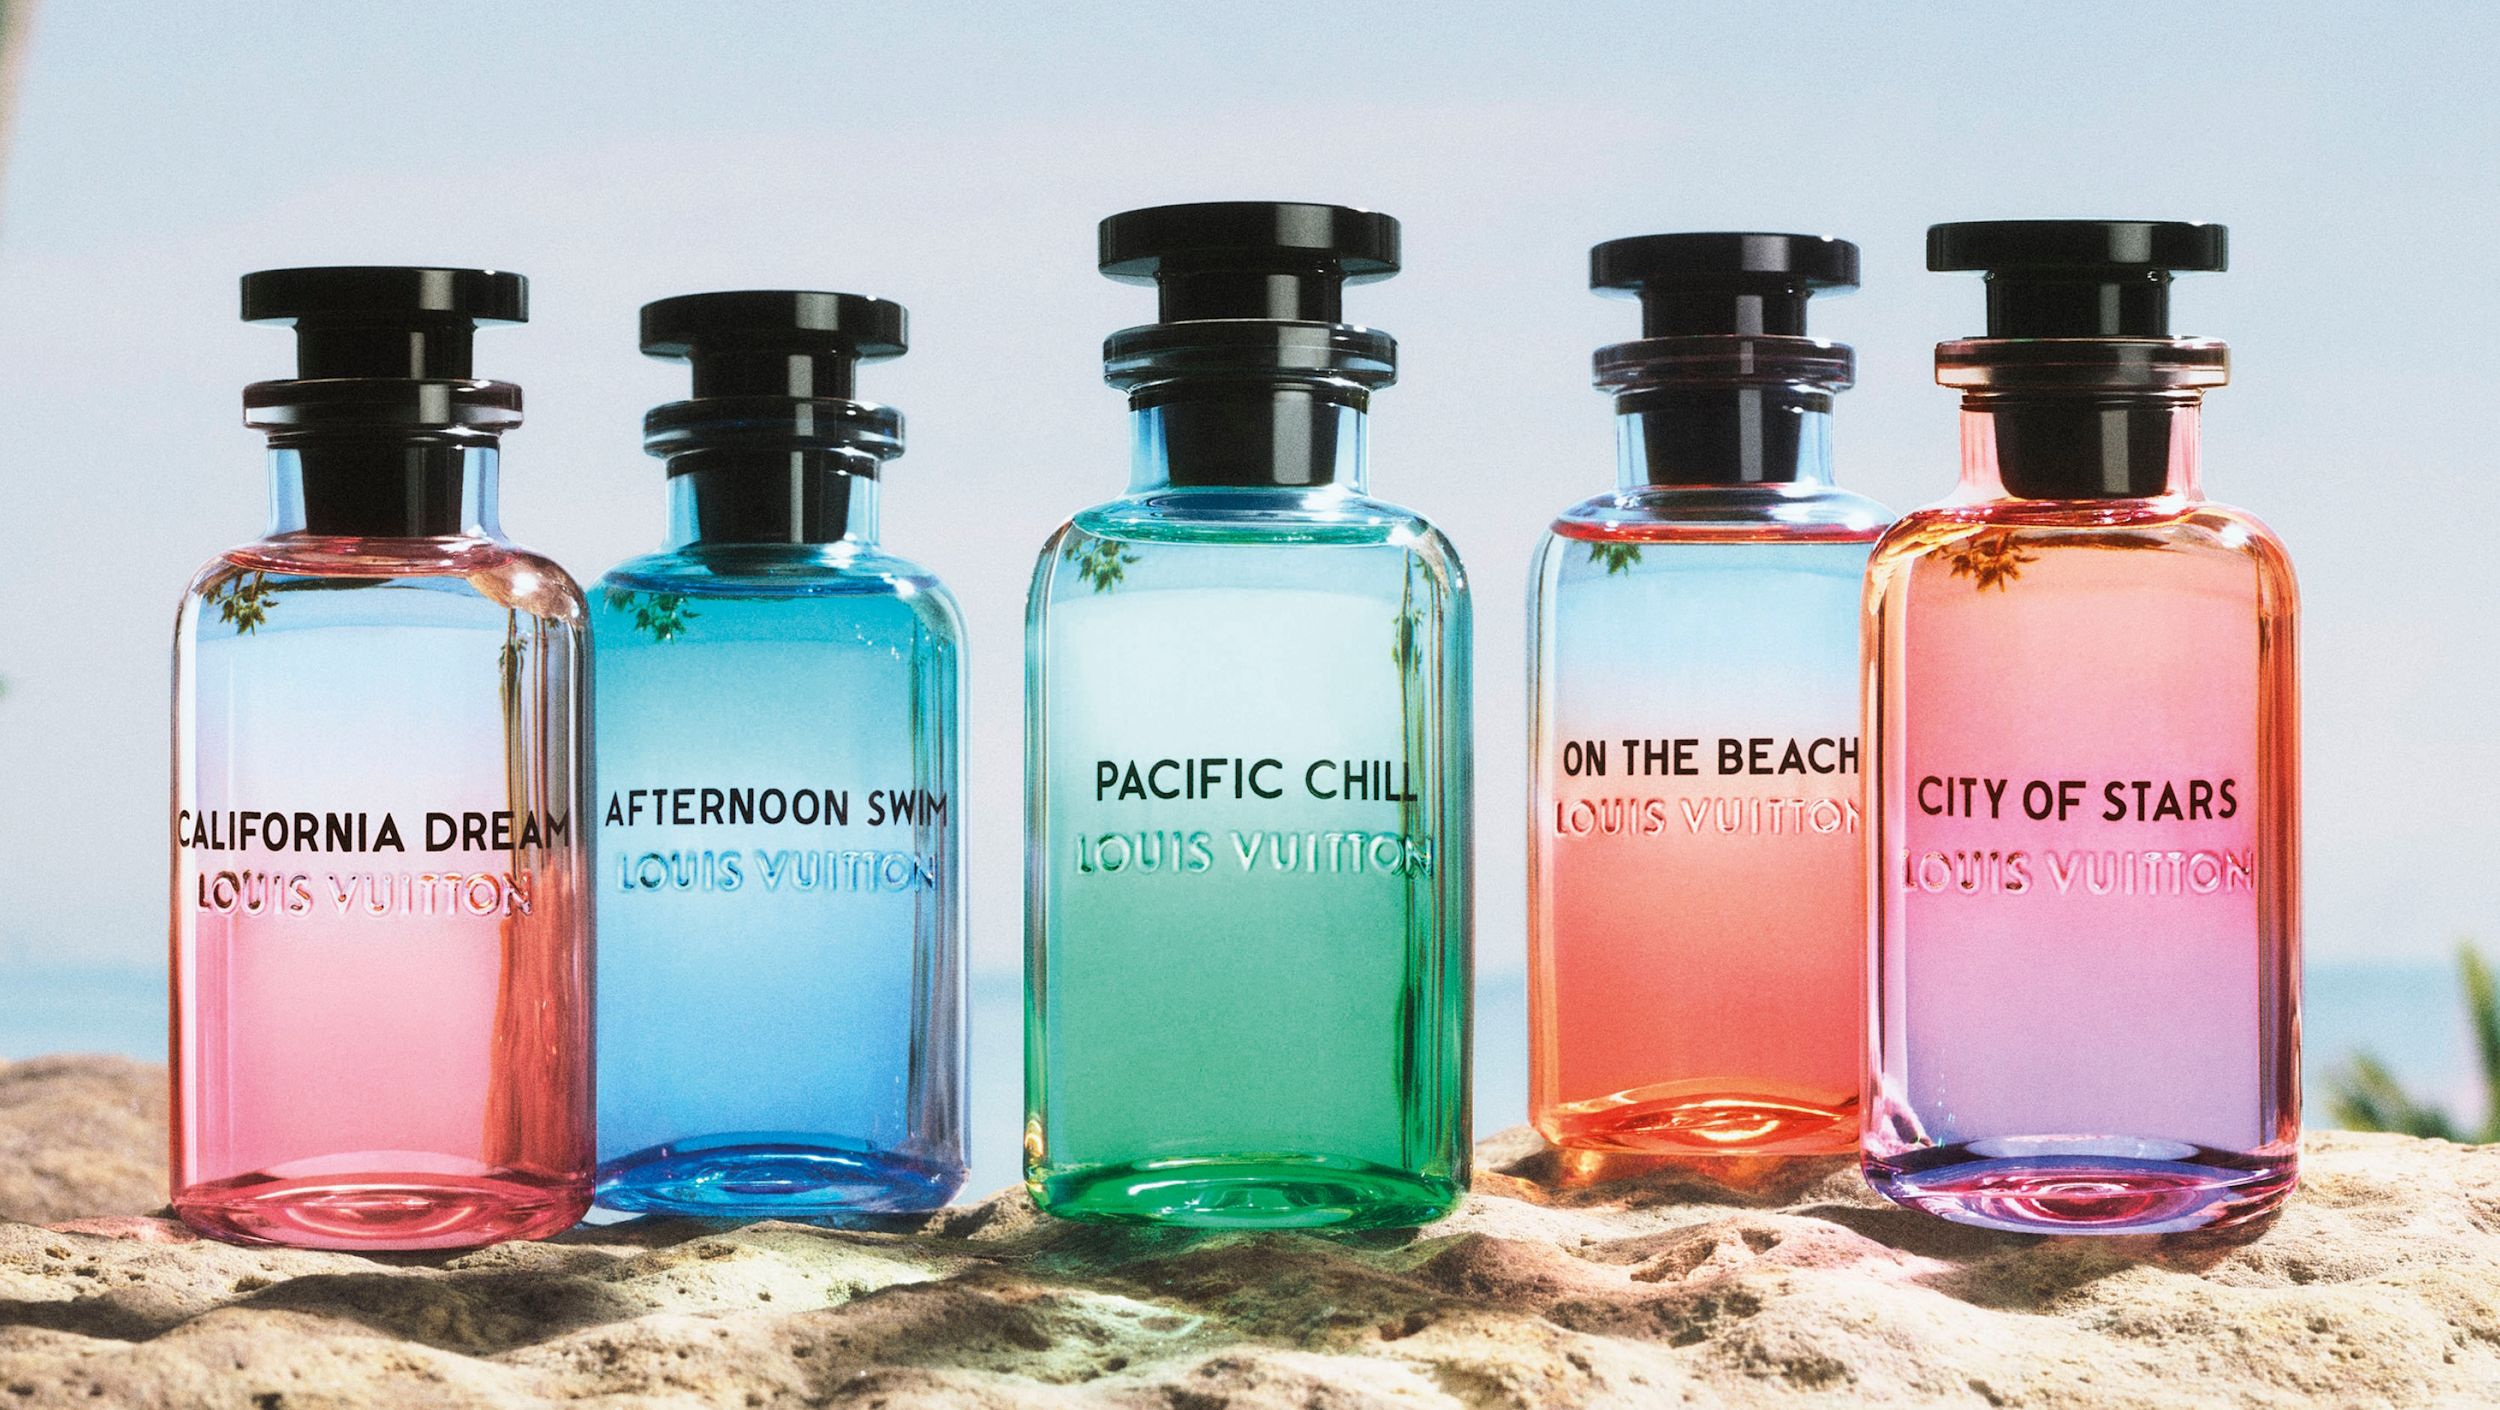 Louis Vuitton Reveals Pacific Chill, the Latest Creation by Master